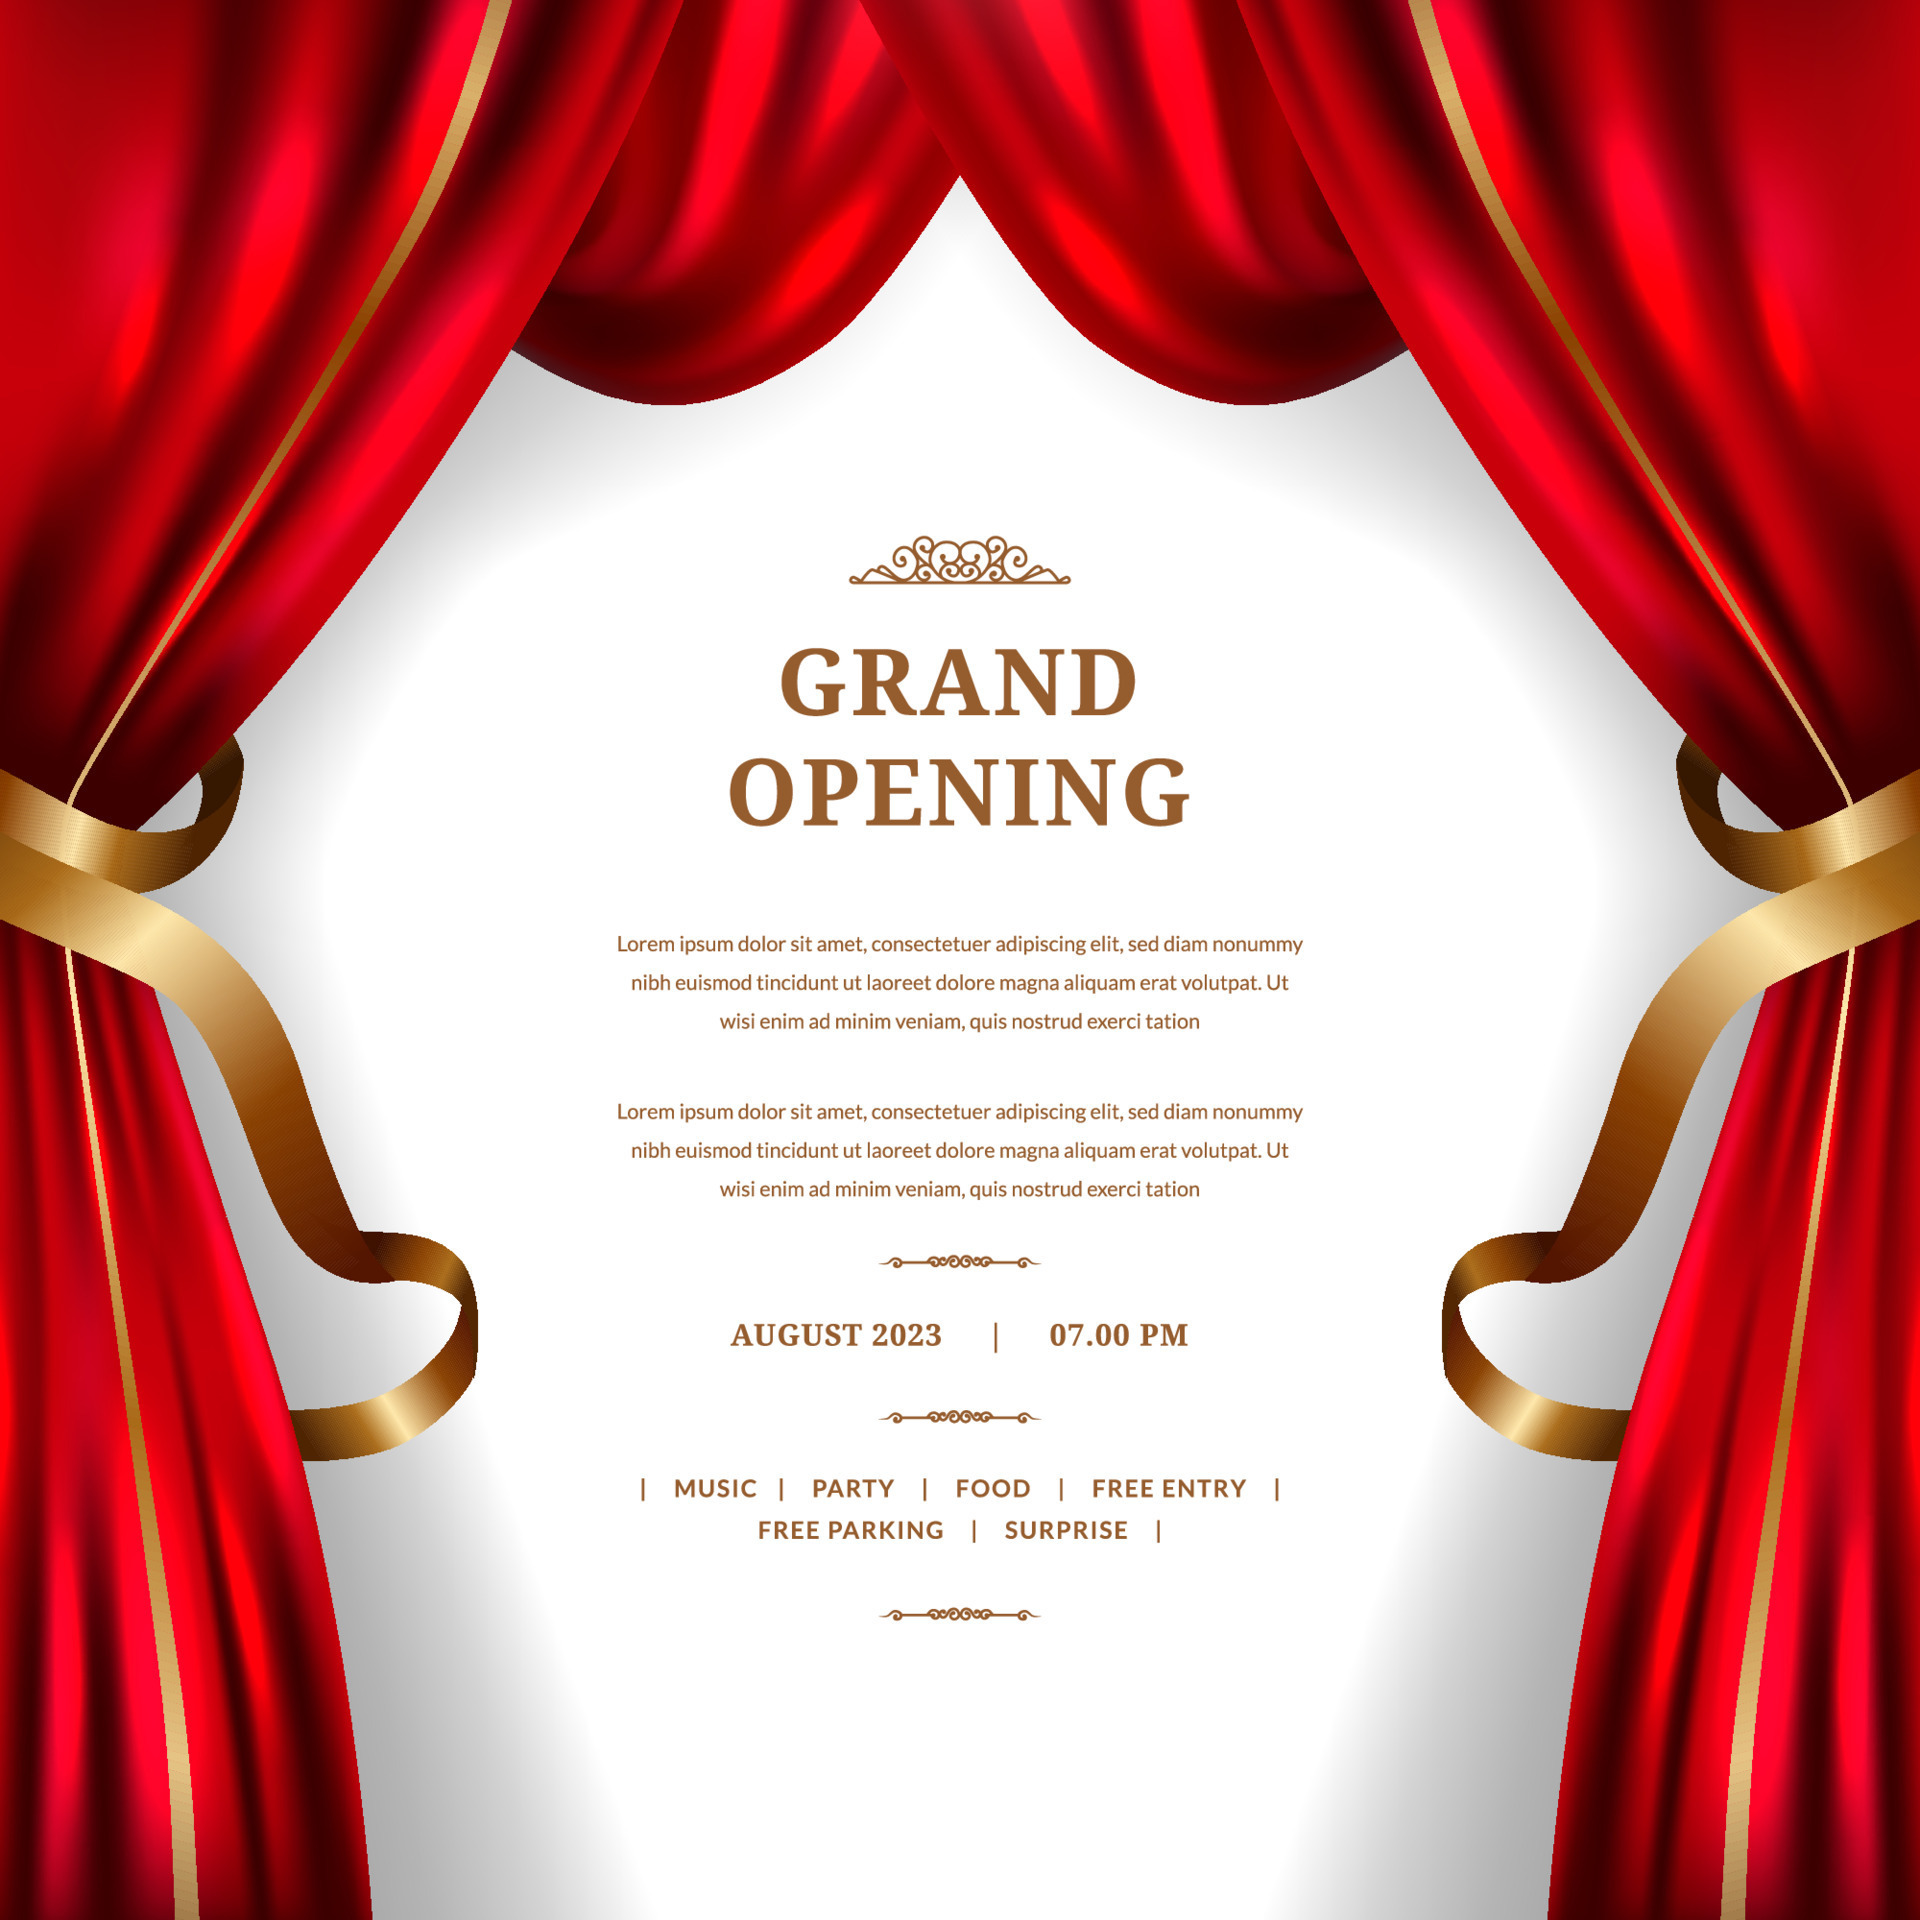 Grand Opening With Red Curtain And Golden Ornament Decoration Poster